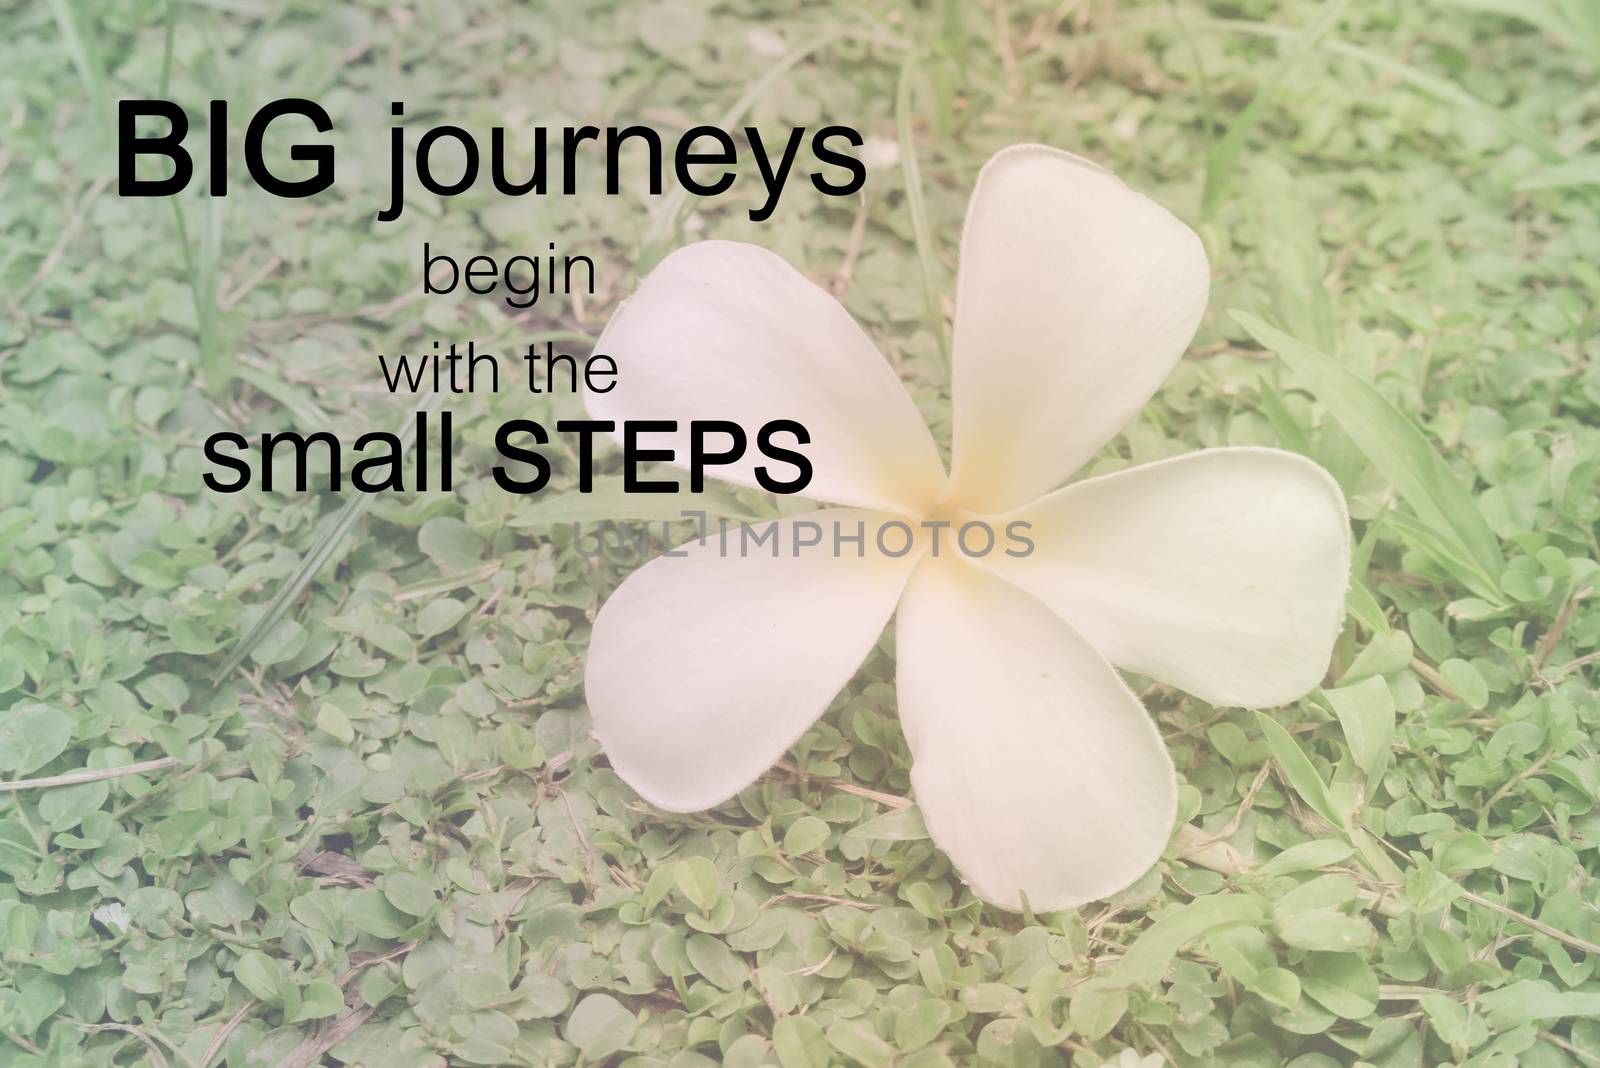 Word  Big journeys begin with the small steps.Inspirational motivational quote on white plumeria on the ground - Vintage Filter Effect by phatpc